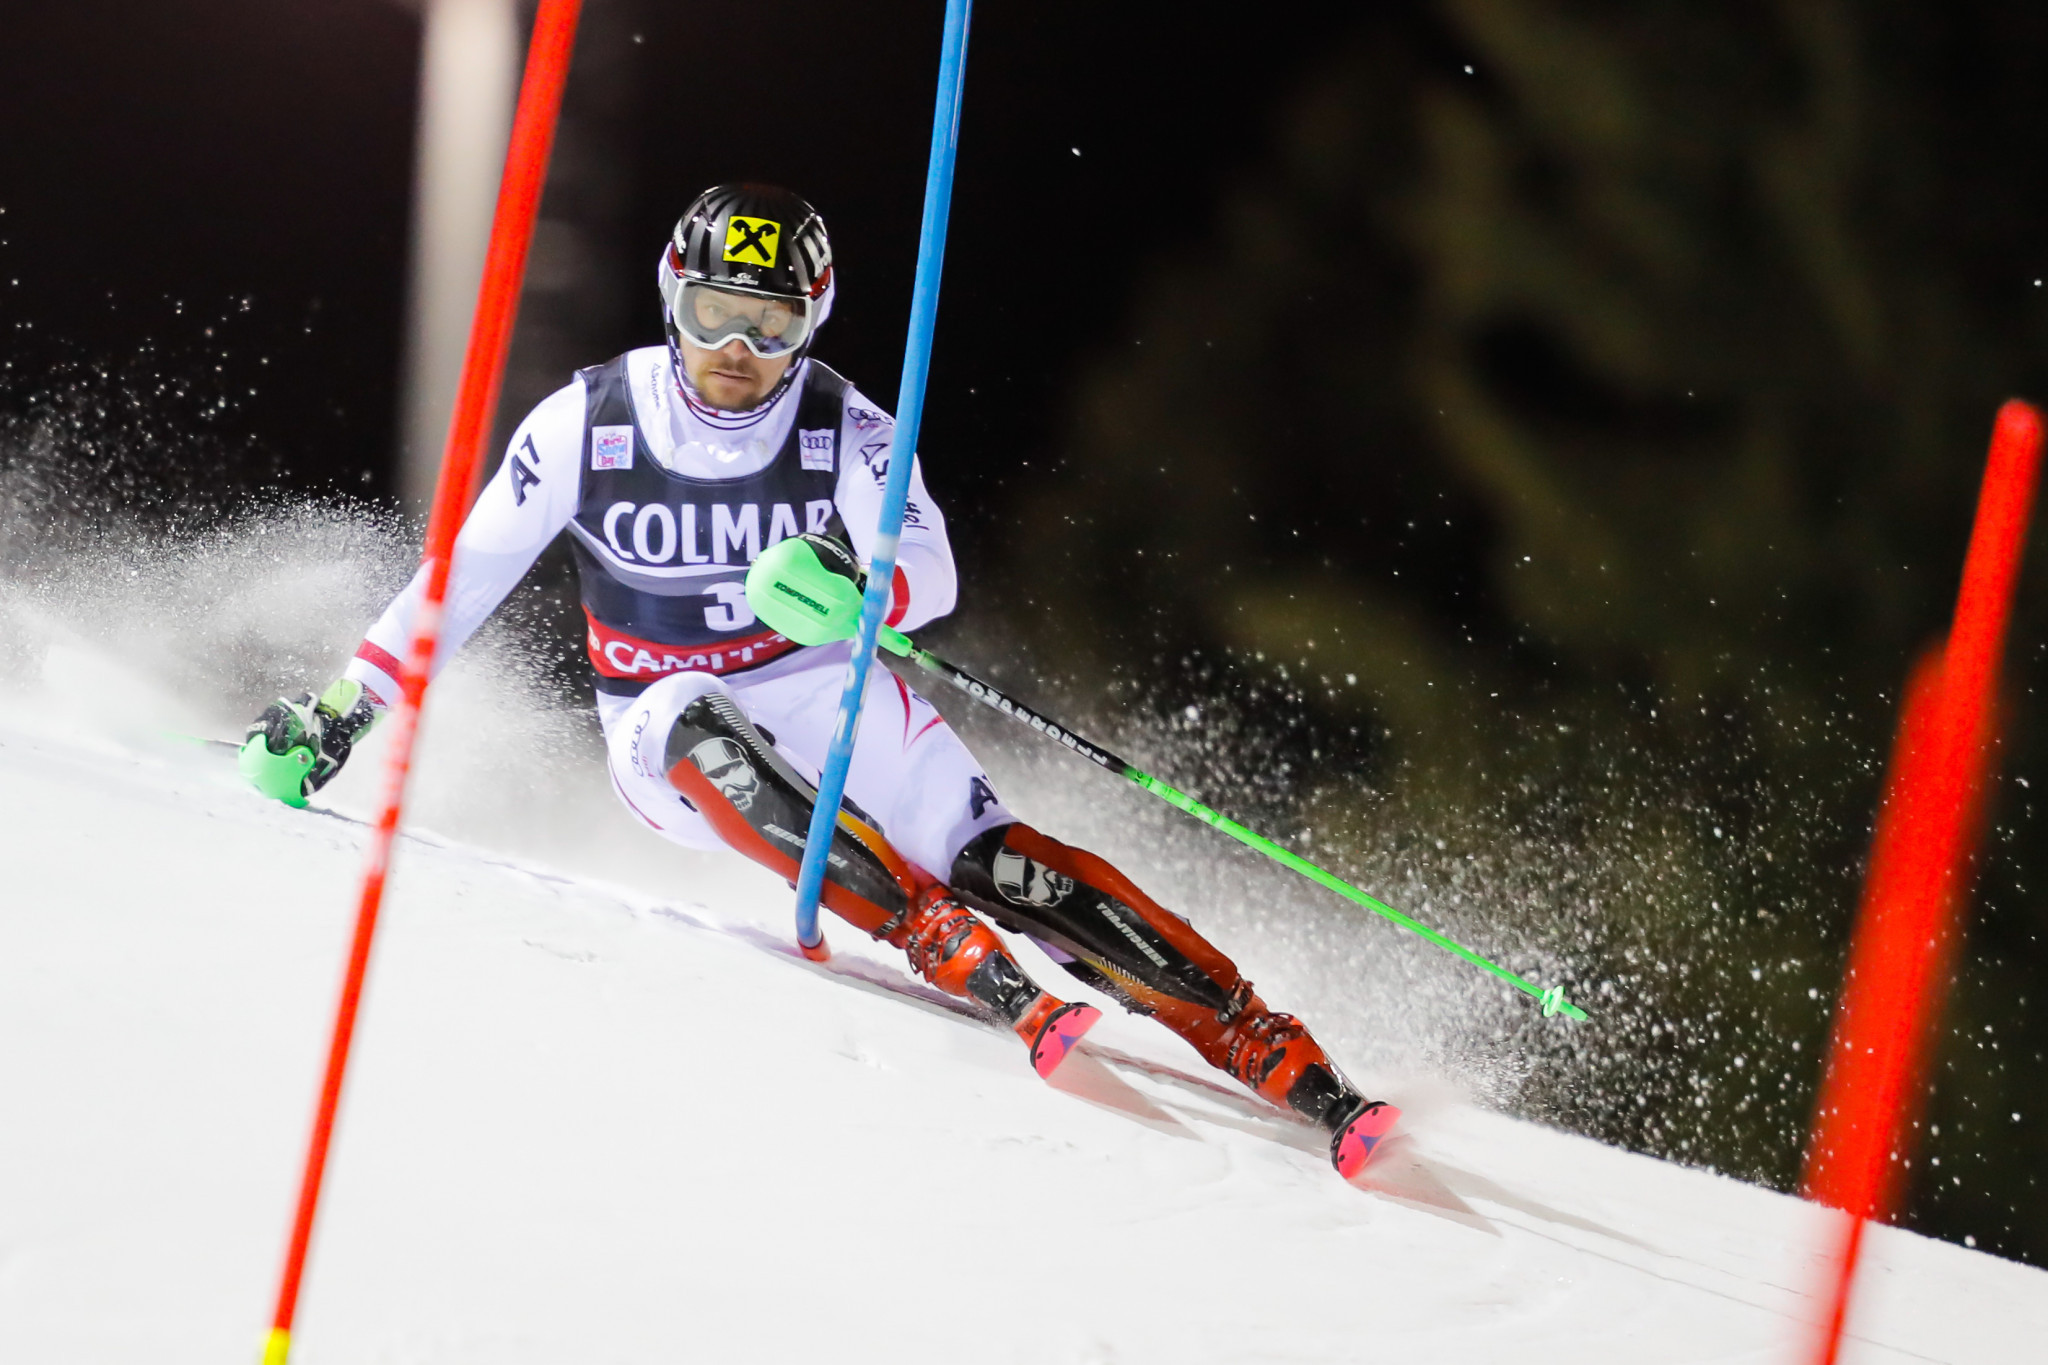 Hirscher maintains commanding start to season with slalom success at Alpine Skiing World Cup